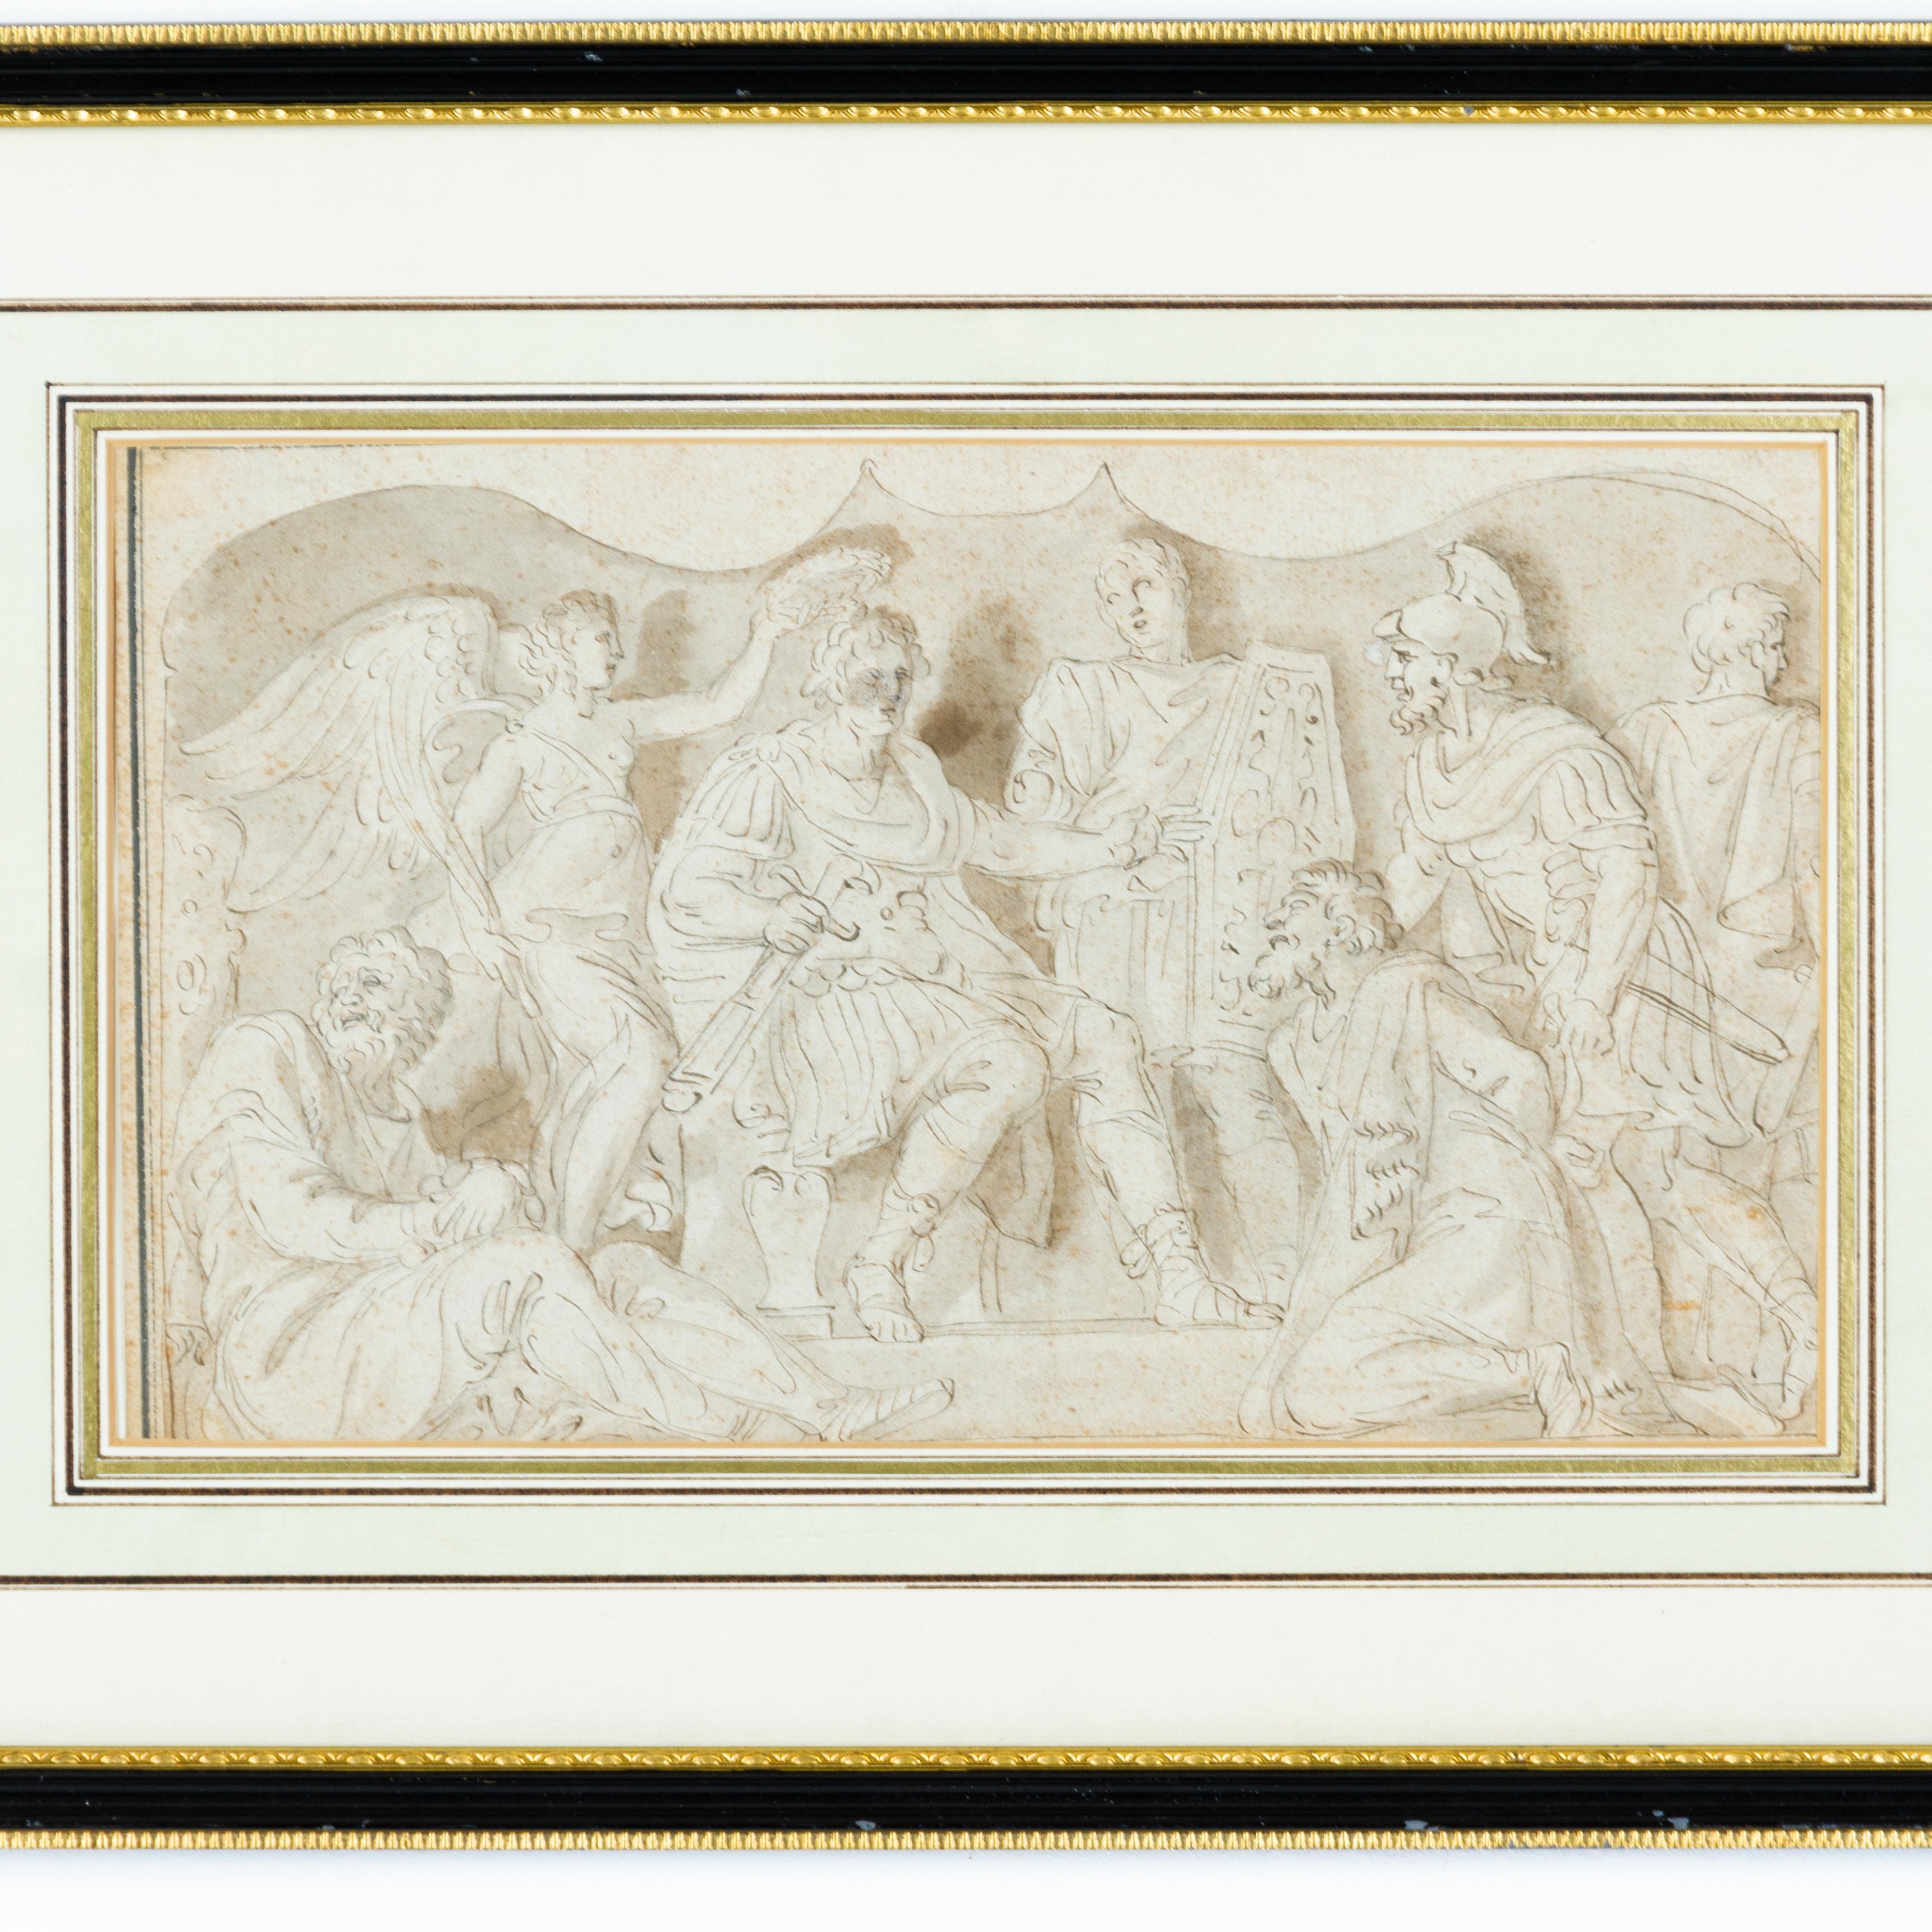 16th century Italian old master pen, ink & wash drawing depicting an ancient roman scene - soldiers presenting prisoners brought before the Emperor for execution, watermarked, held in a neoclassical gilt frame under protective glass. 

Polidoro